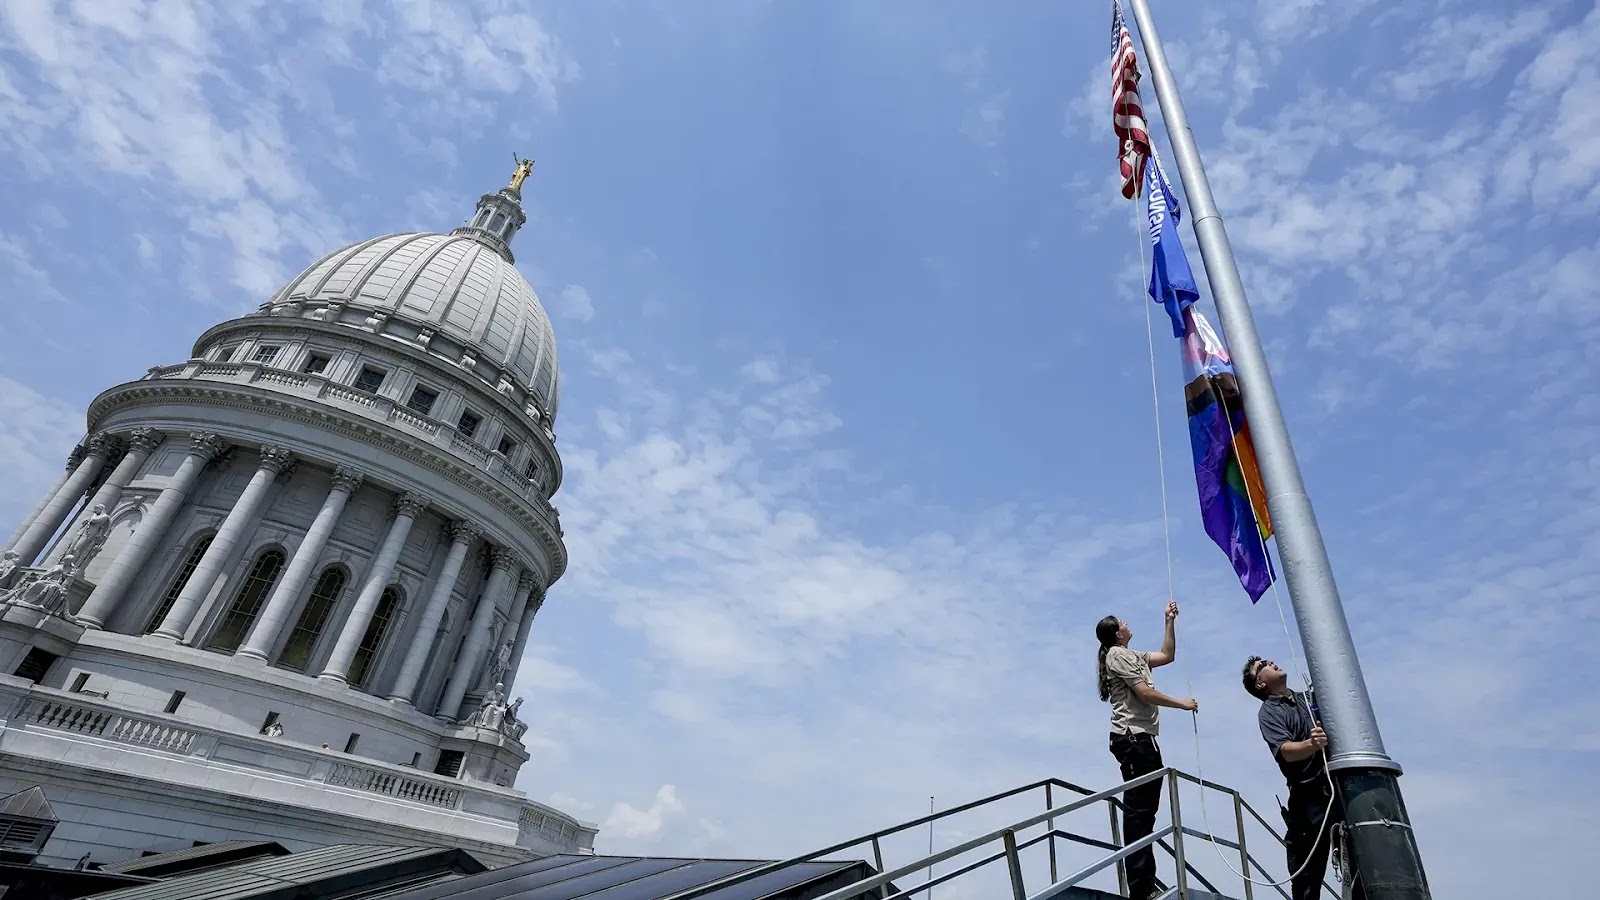 Governor Tony Evers Raises Progress Pride Flag Over Wisconsin Capitol to Support LGBTQ+ Community